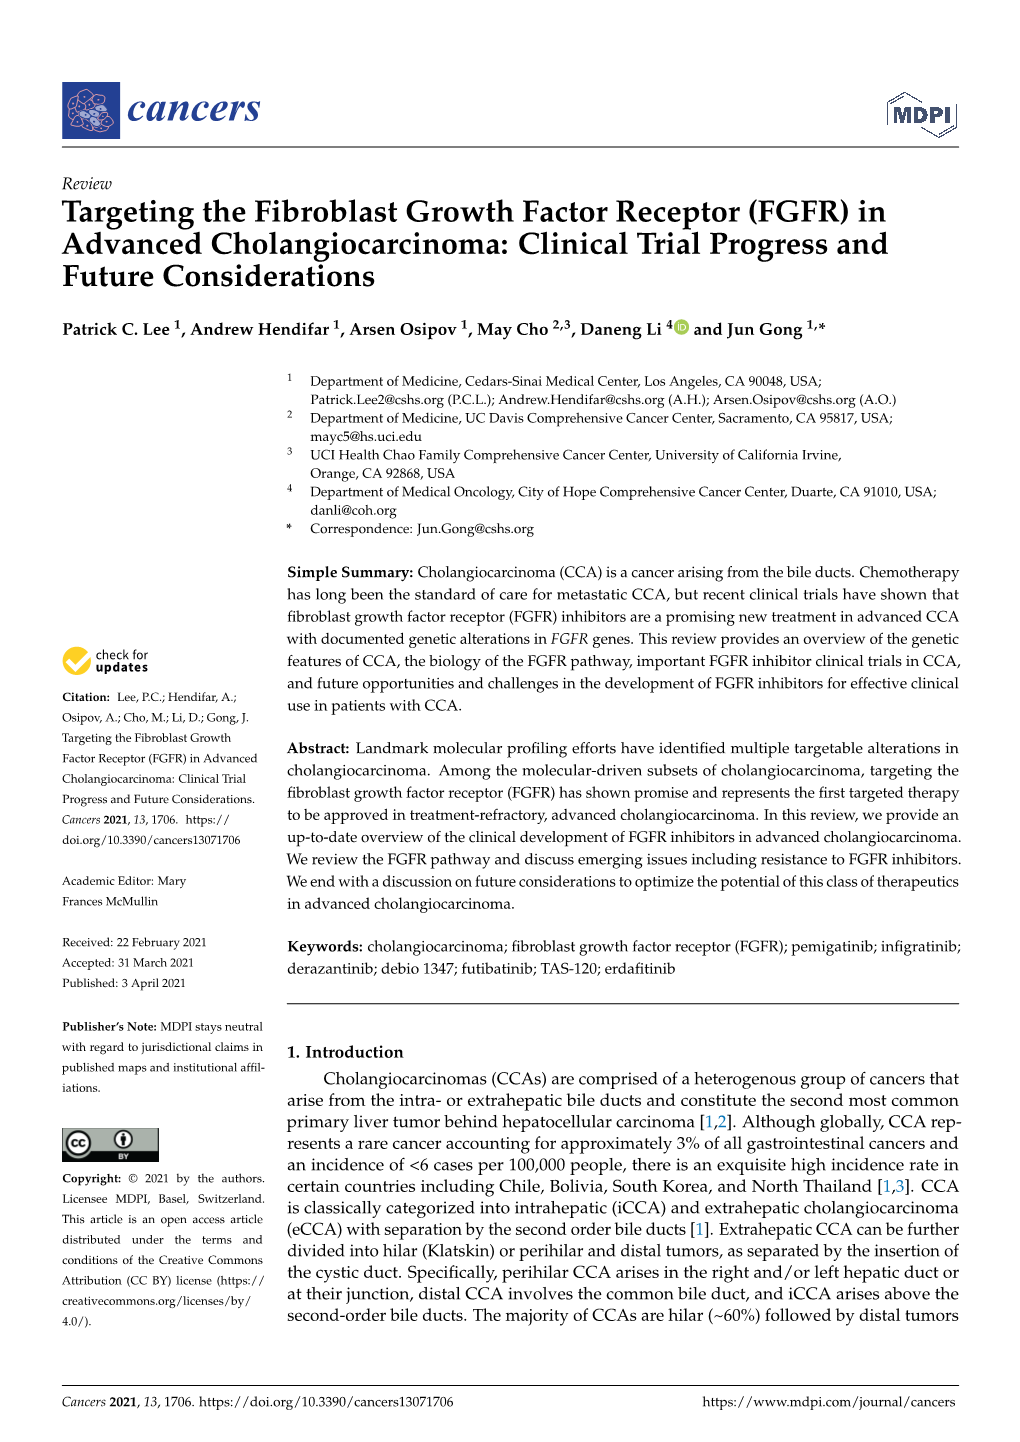 Targeting the Fibroblast Growth Factor Receptor (FGFR) in Advanced Cholangiocarcinoma: Clinical Trial Progress and Future Considerations